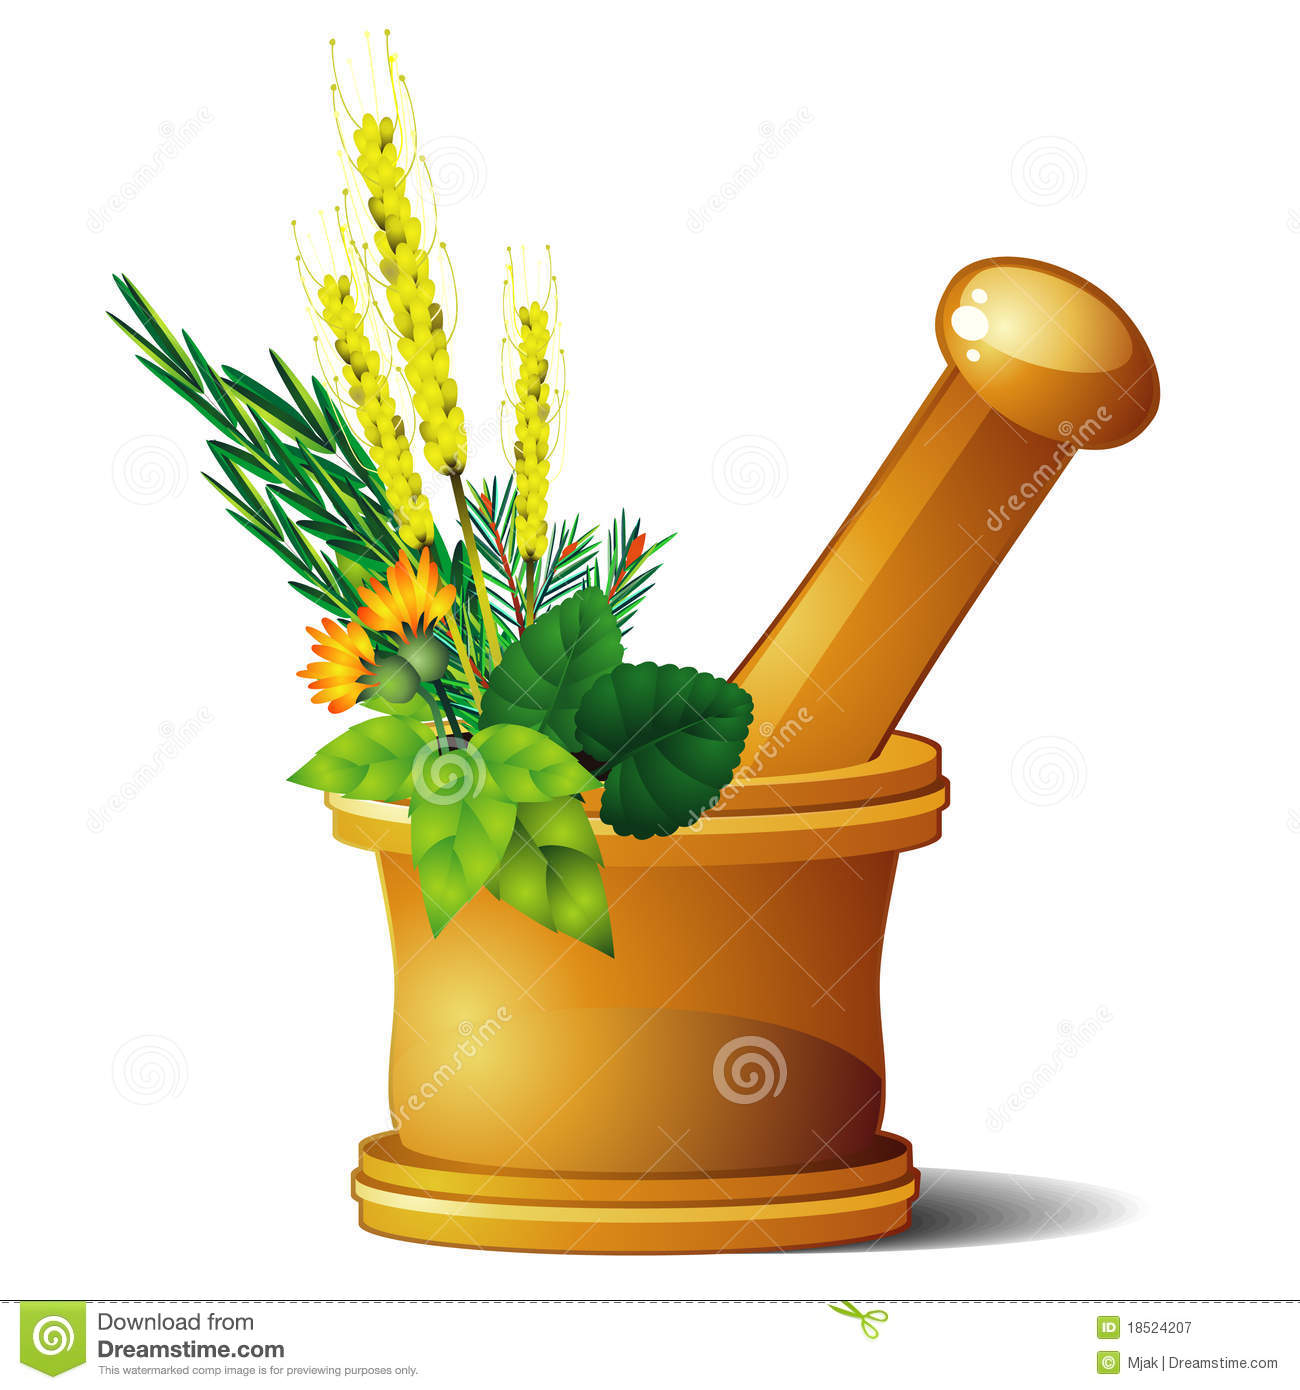 Spices Mortar and Pestle.